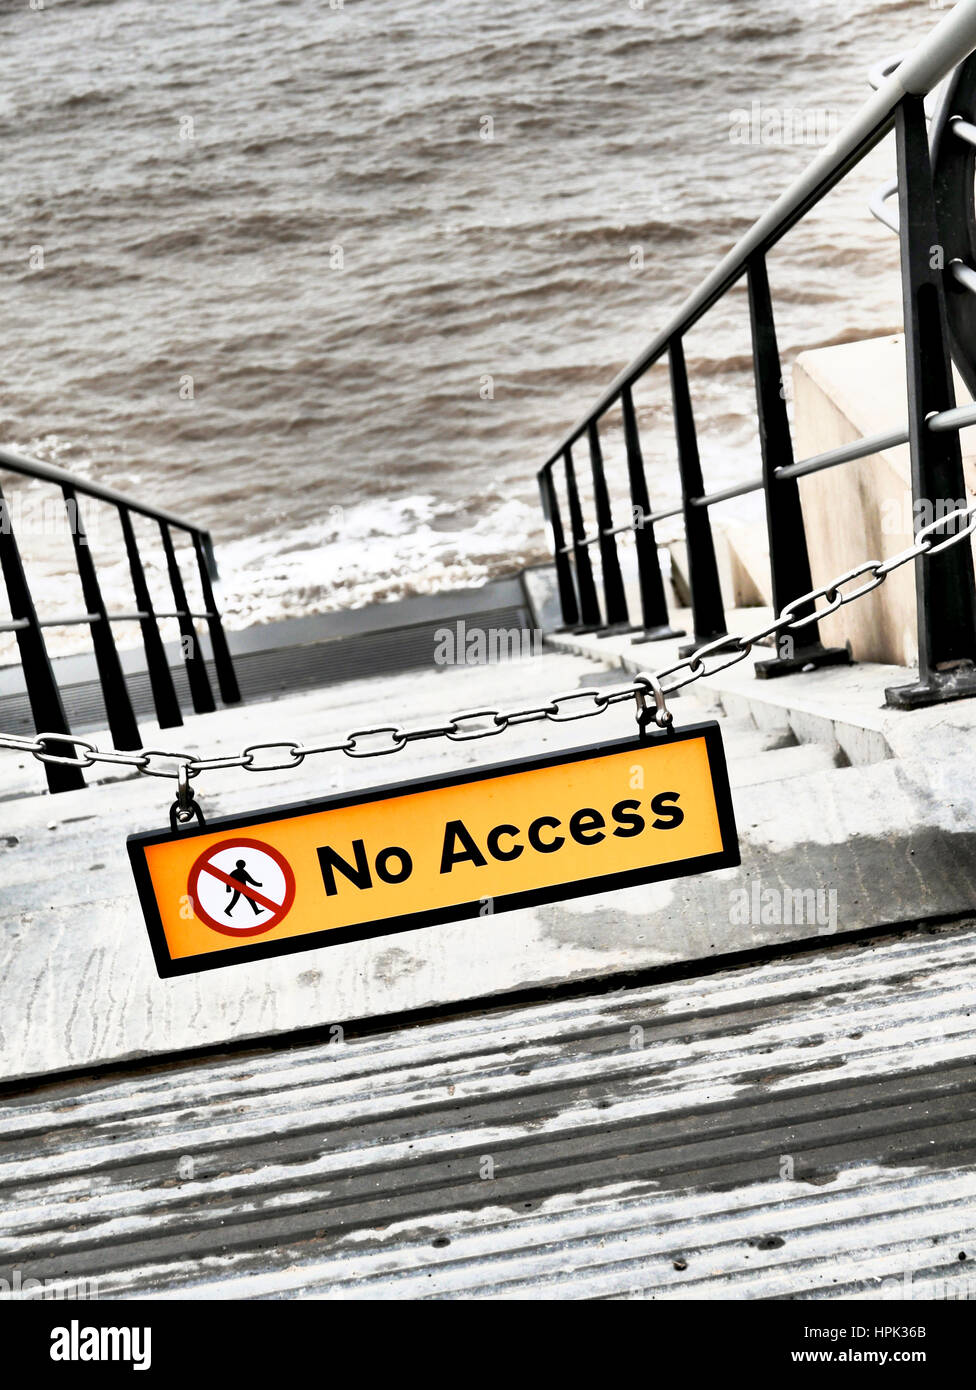 No access to beach at high tide Stock Photo